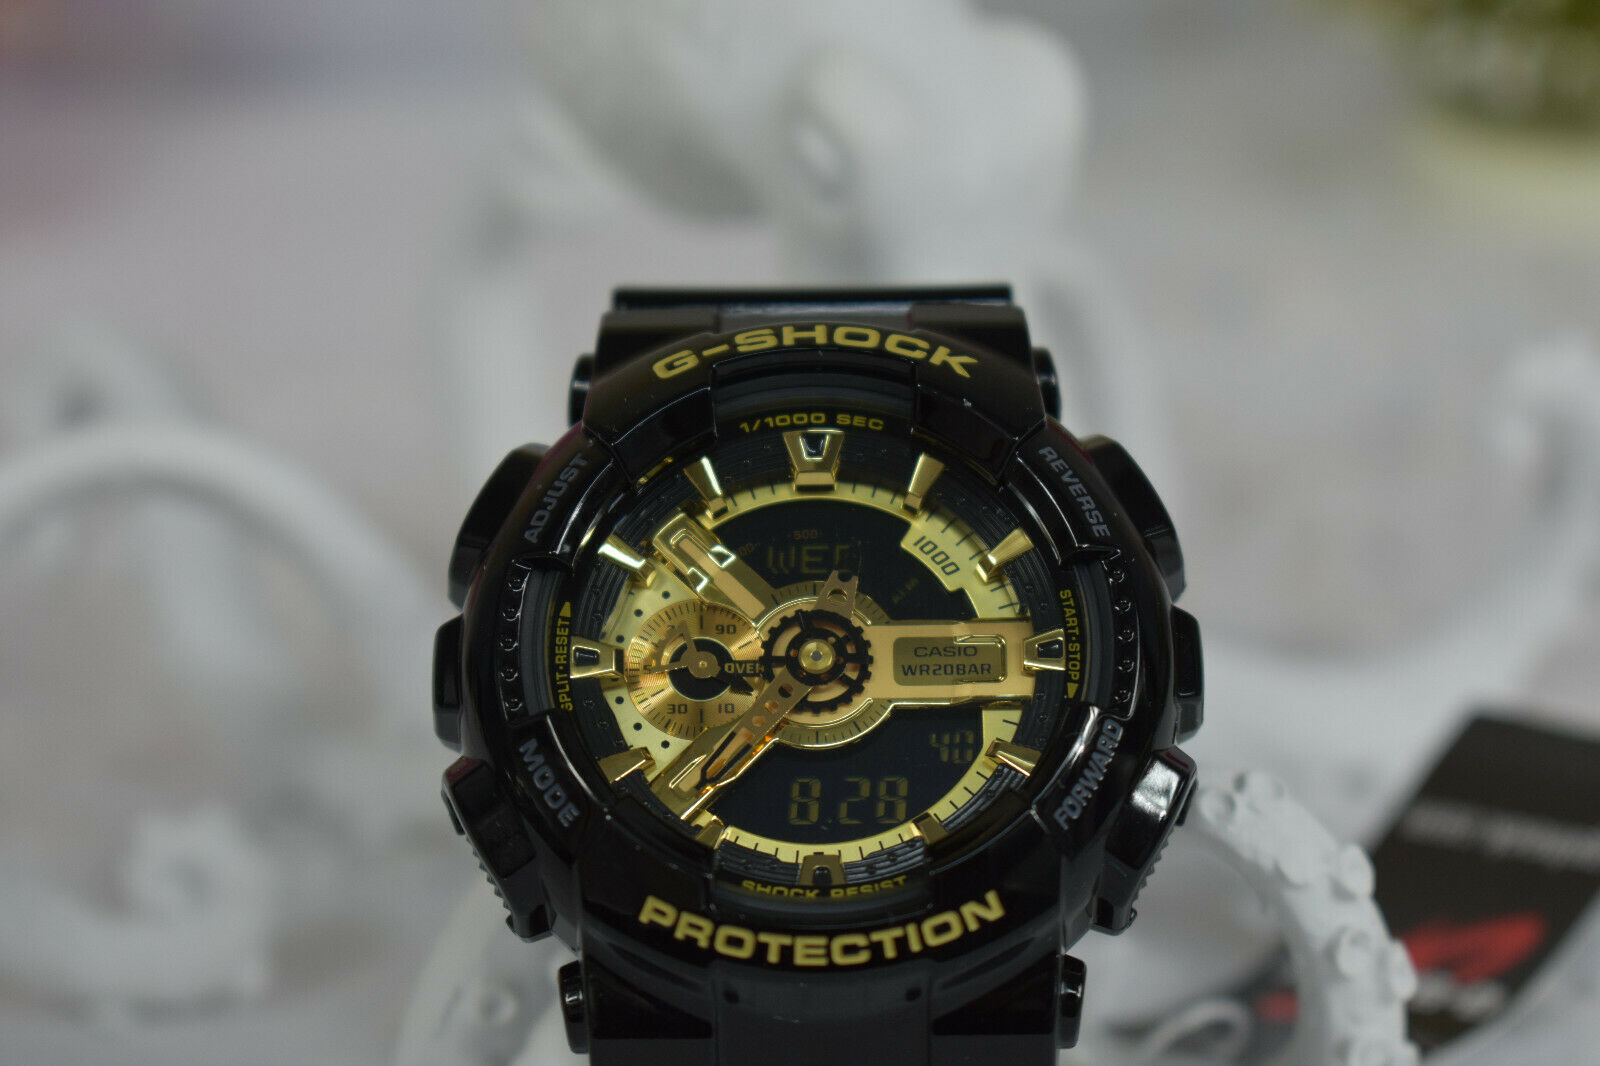 g shock authorized dealers